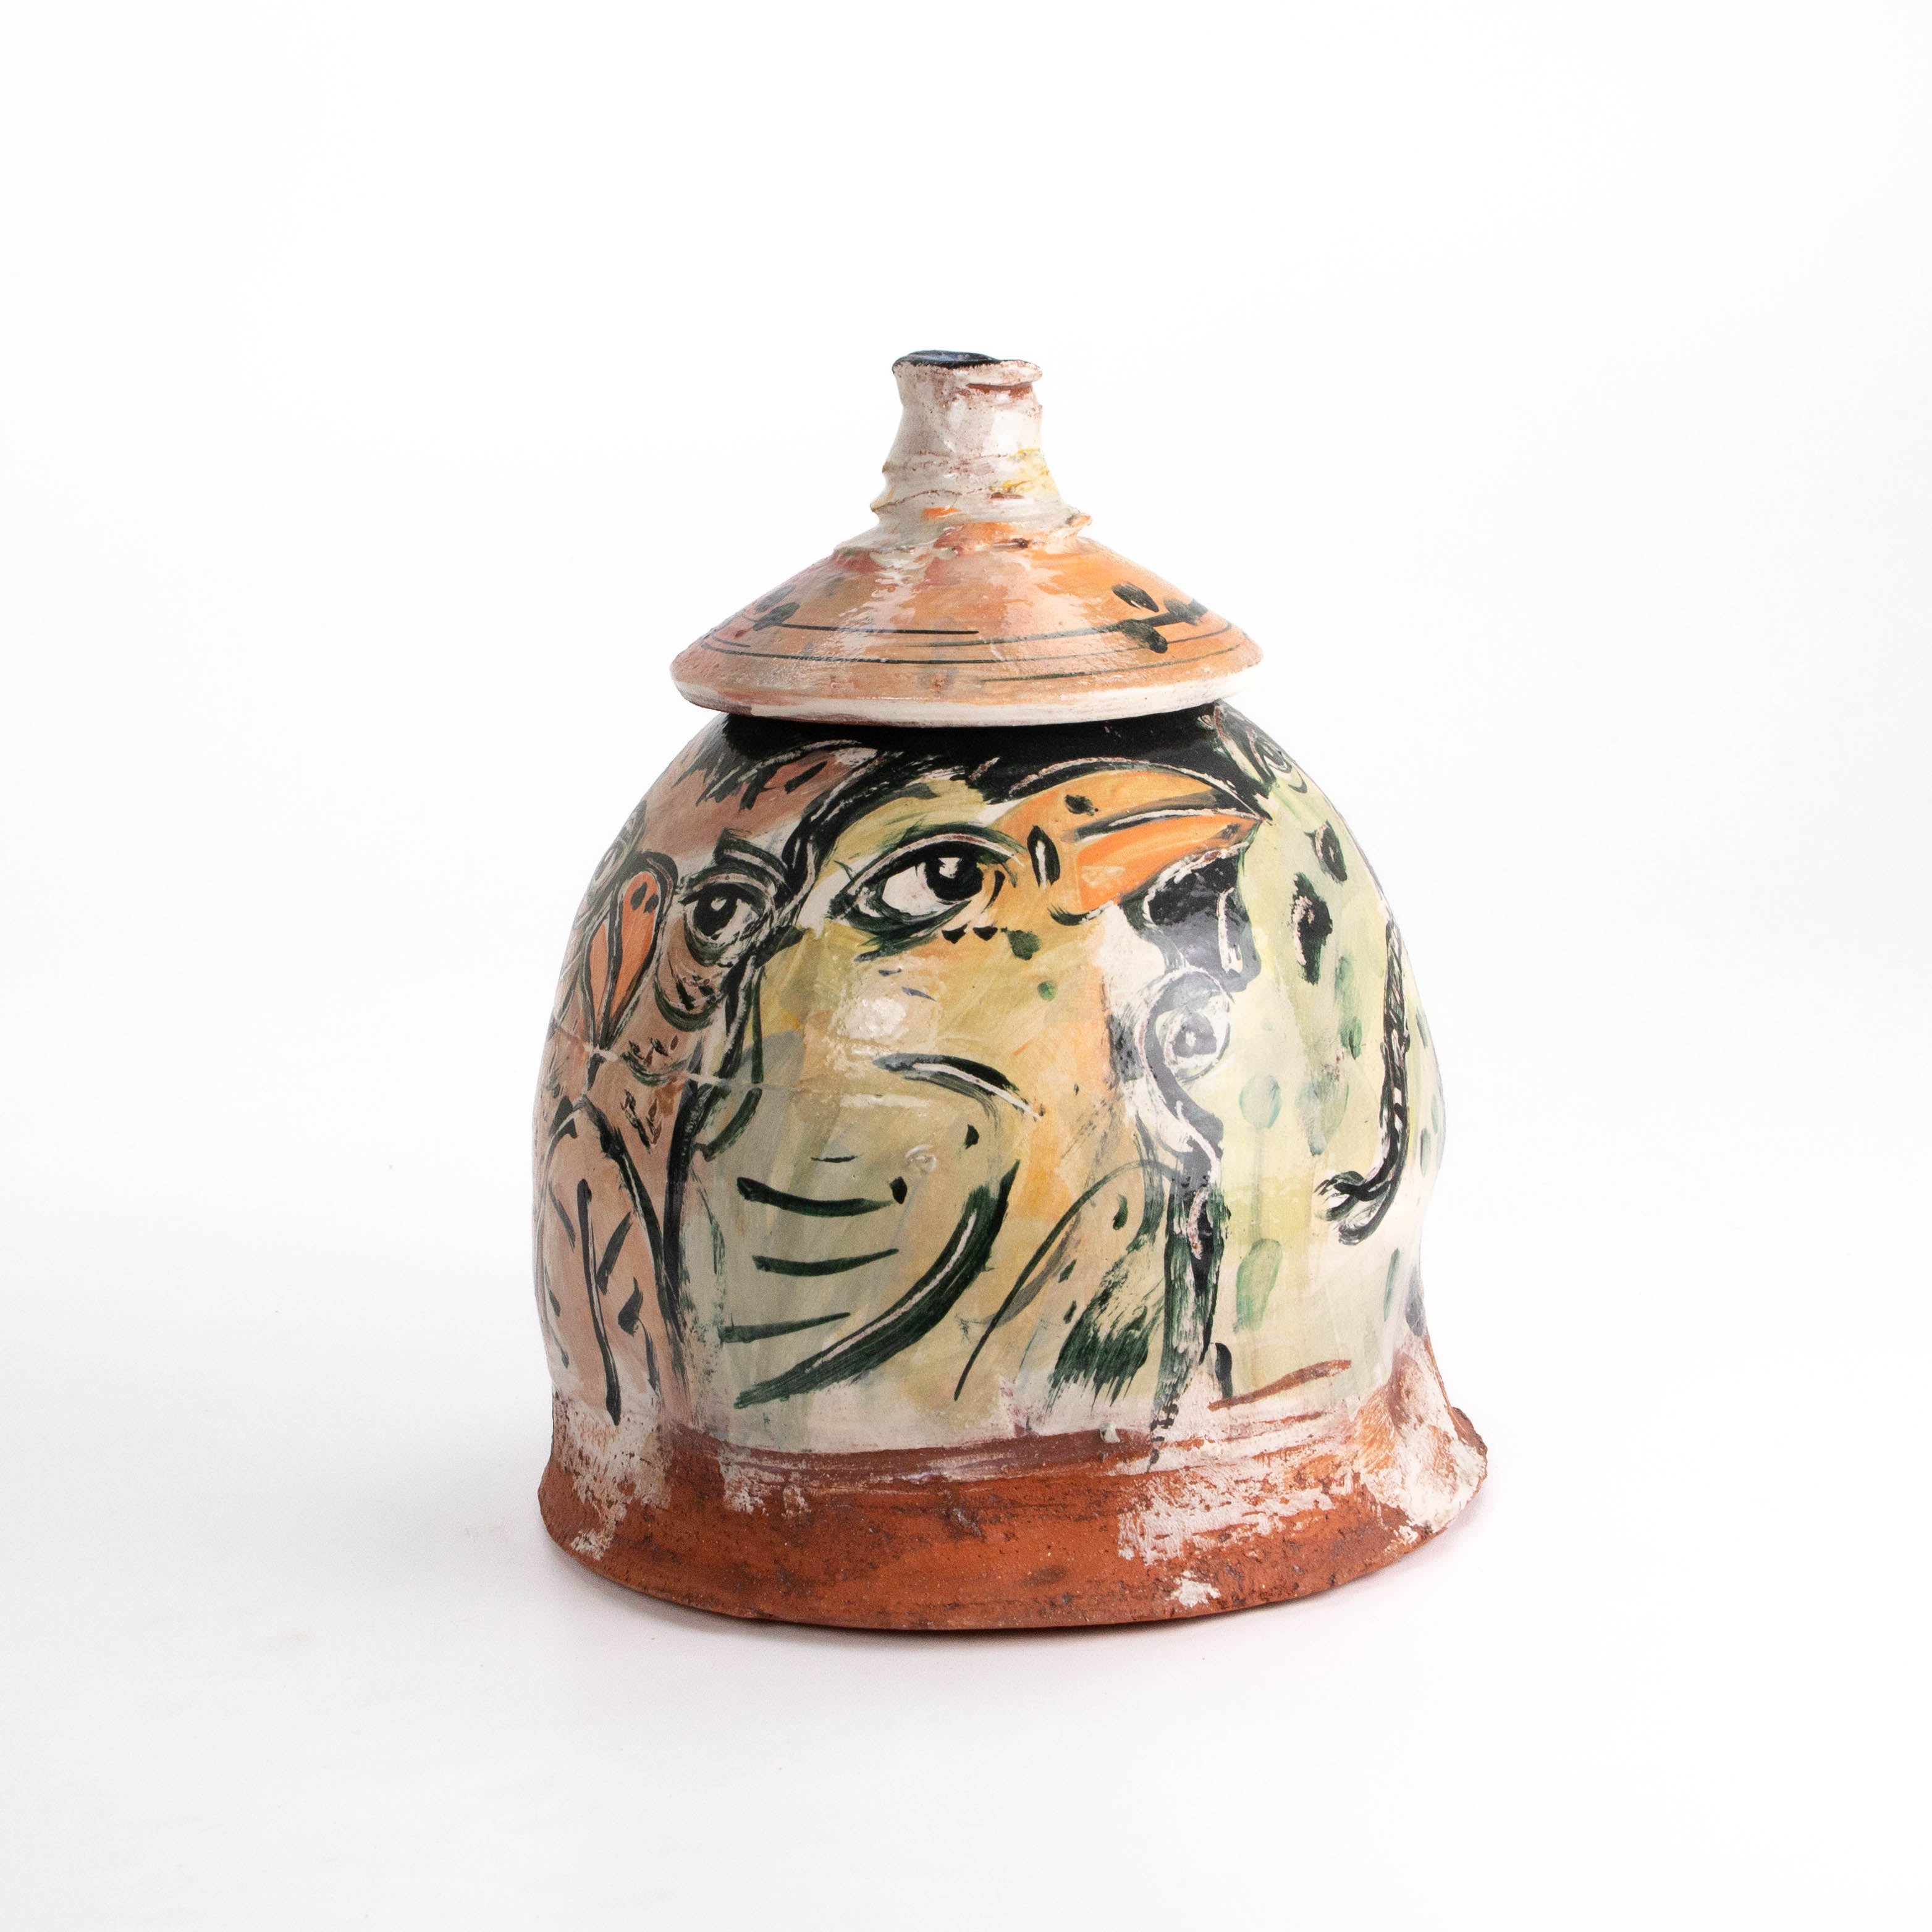 Lidded Jar with Femme and Usual Suspects